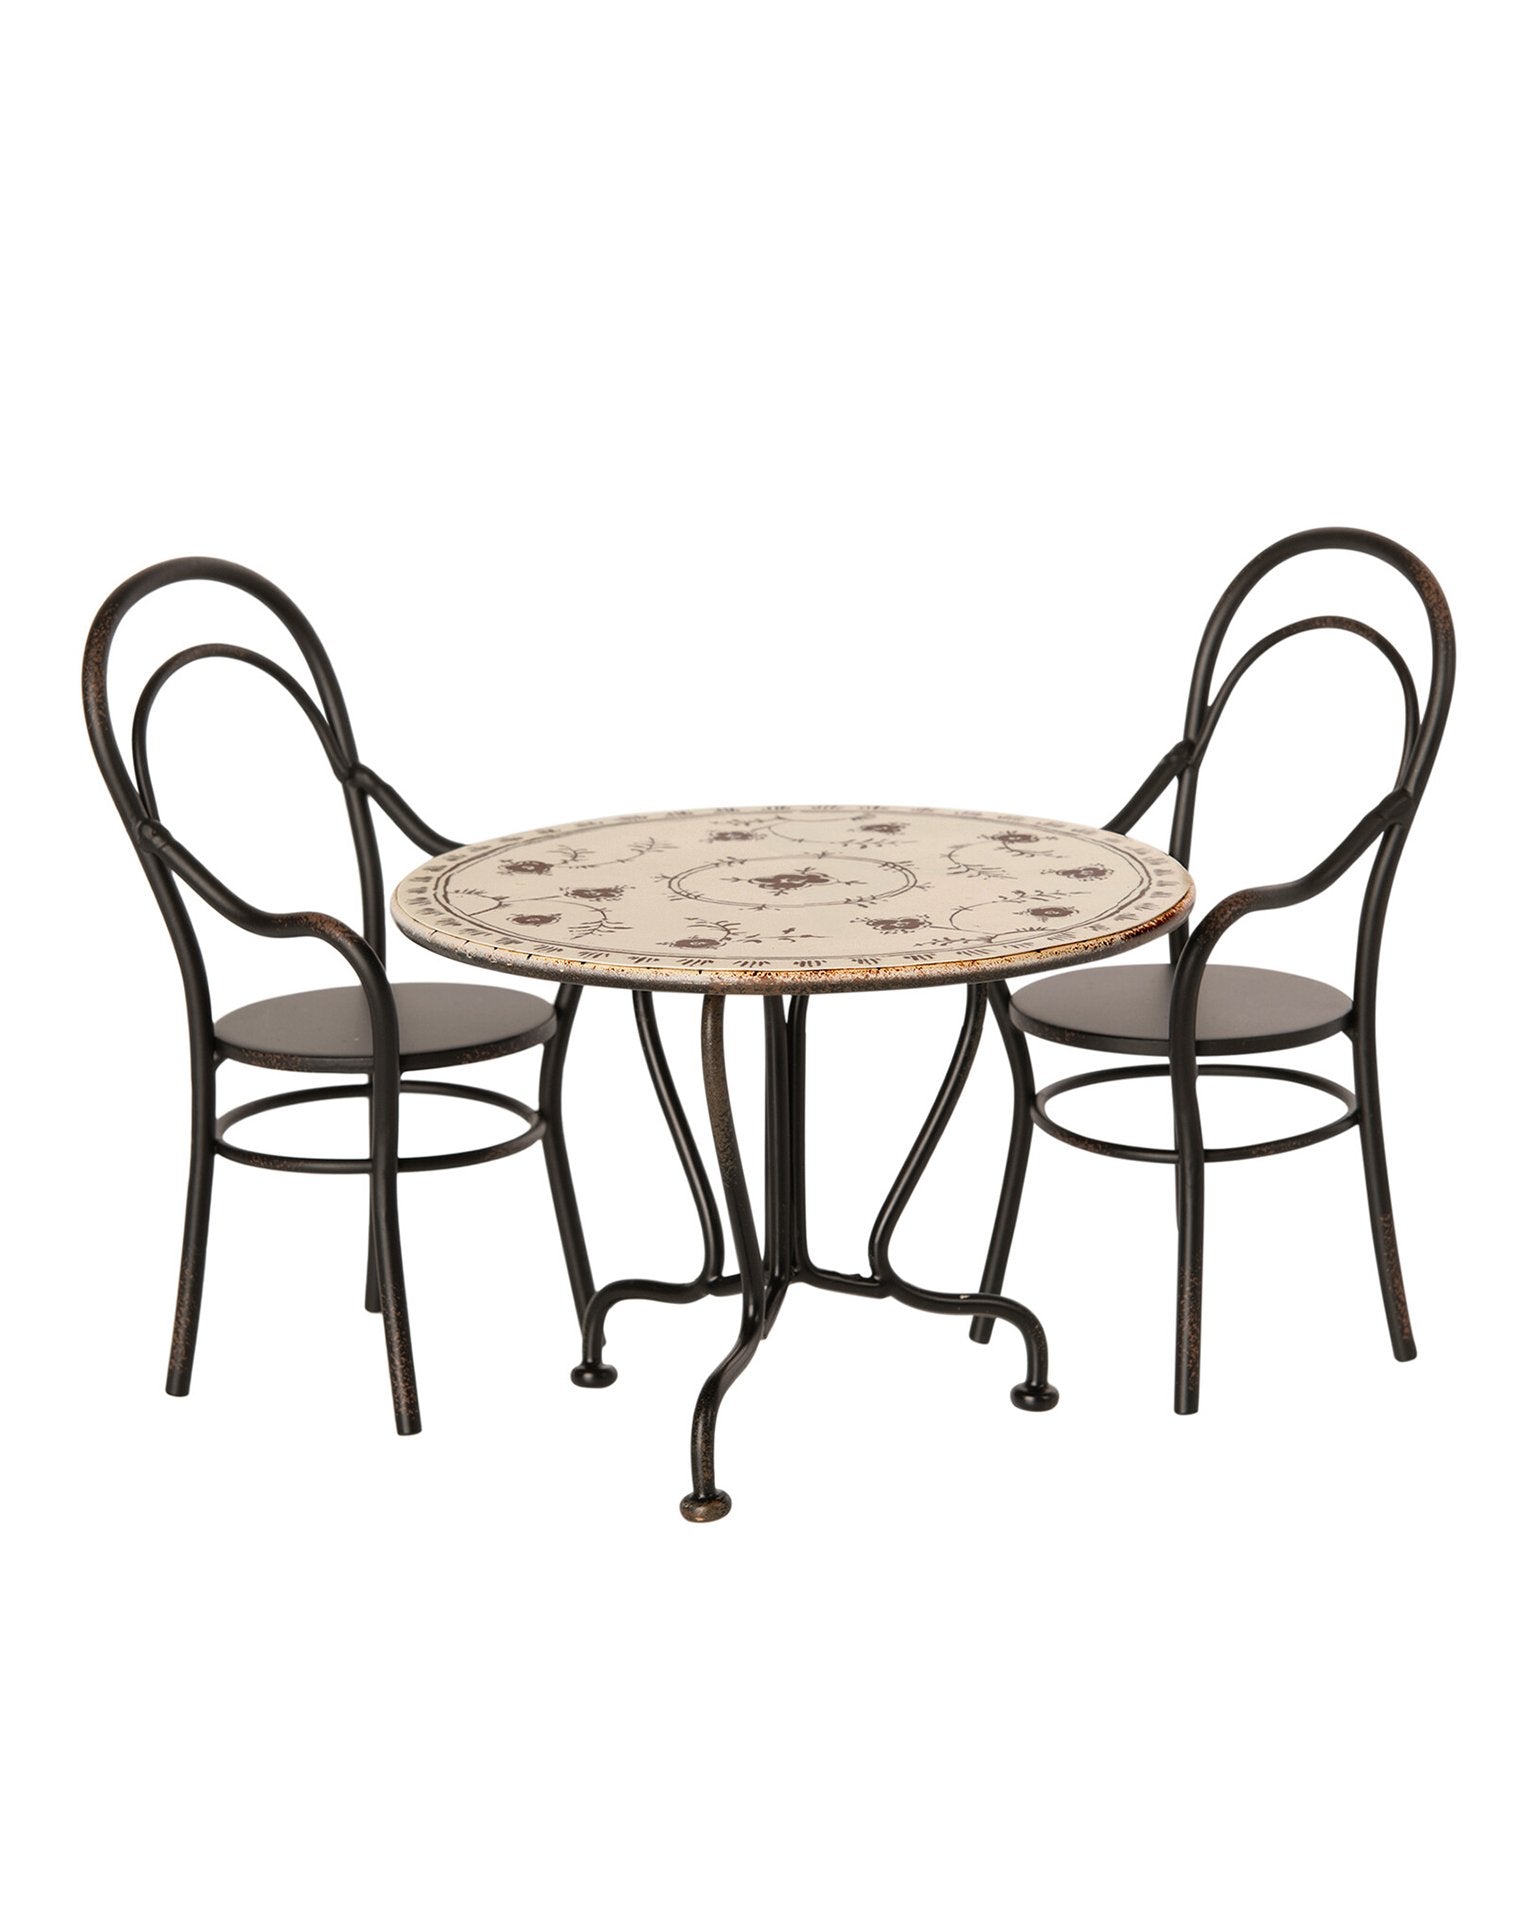 Little maileg play dining table set with 2 chairs